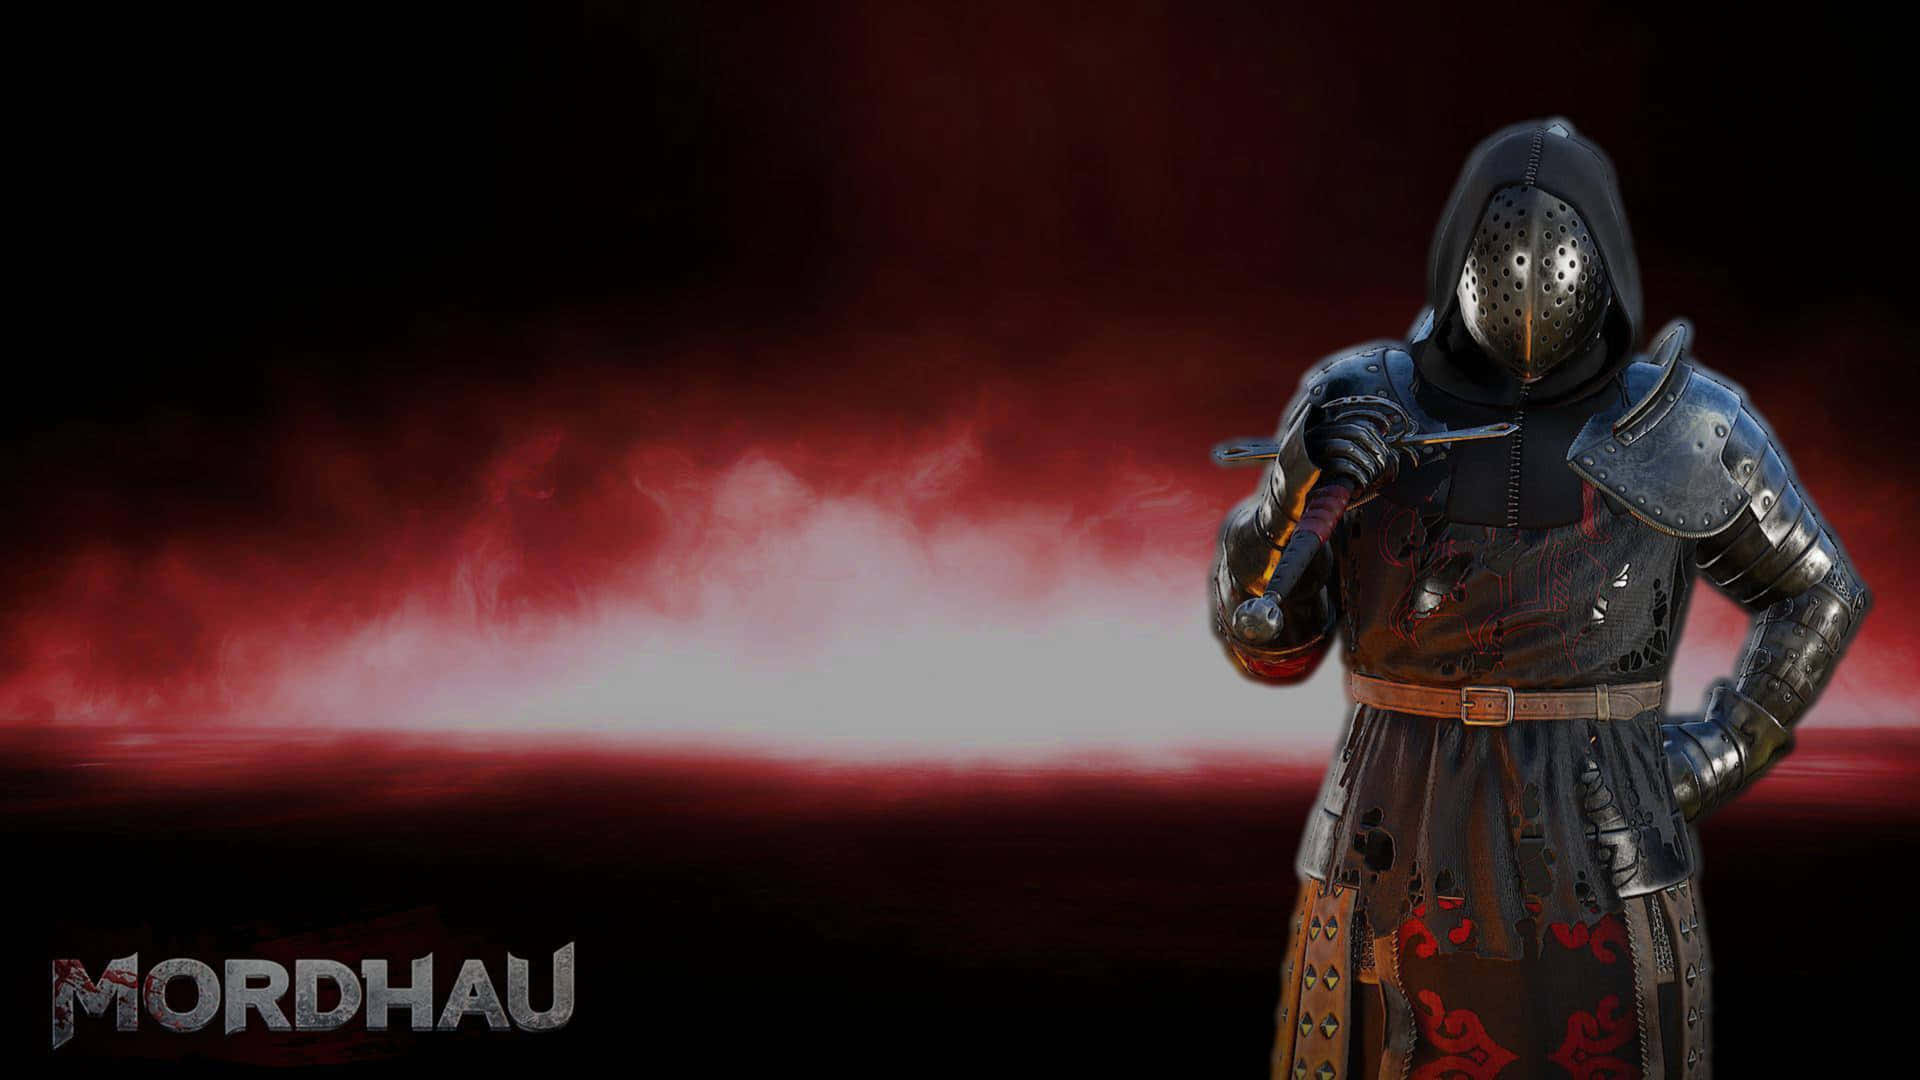 4k Mordhau Background Hooded Knight With A Sword